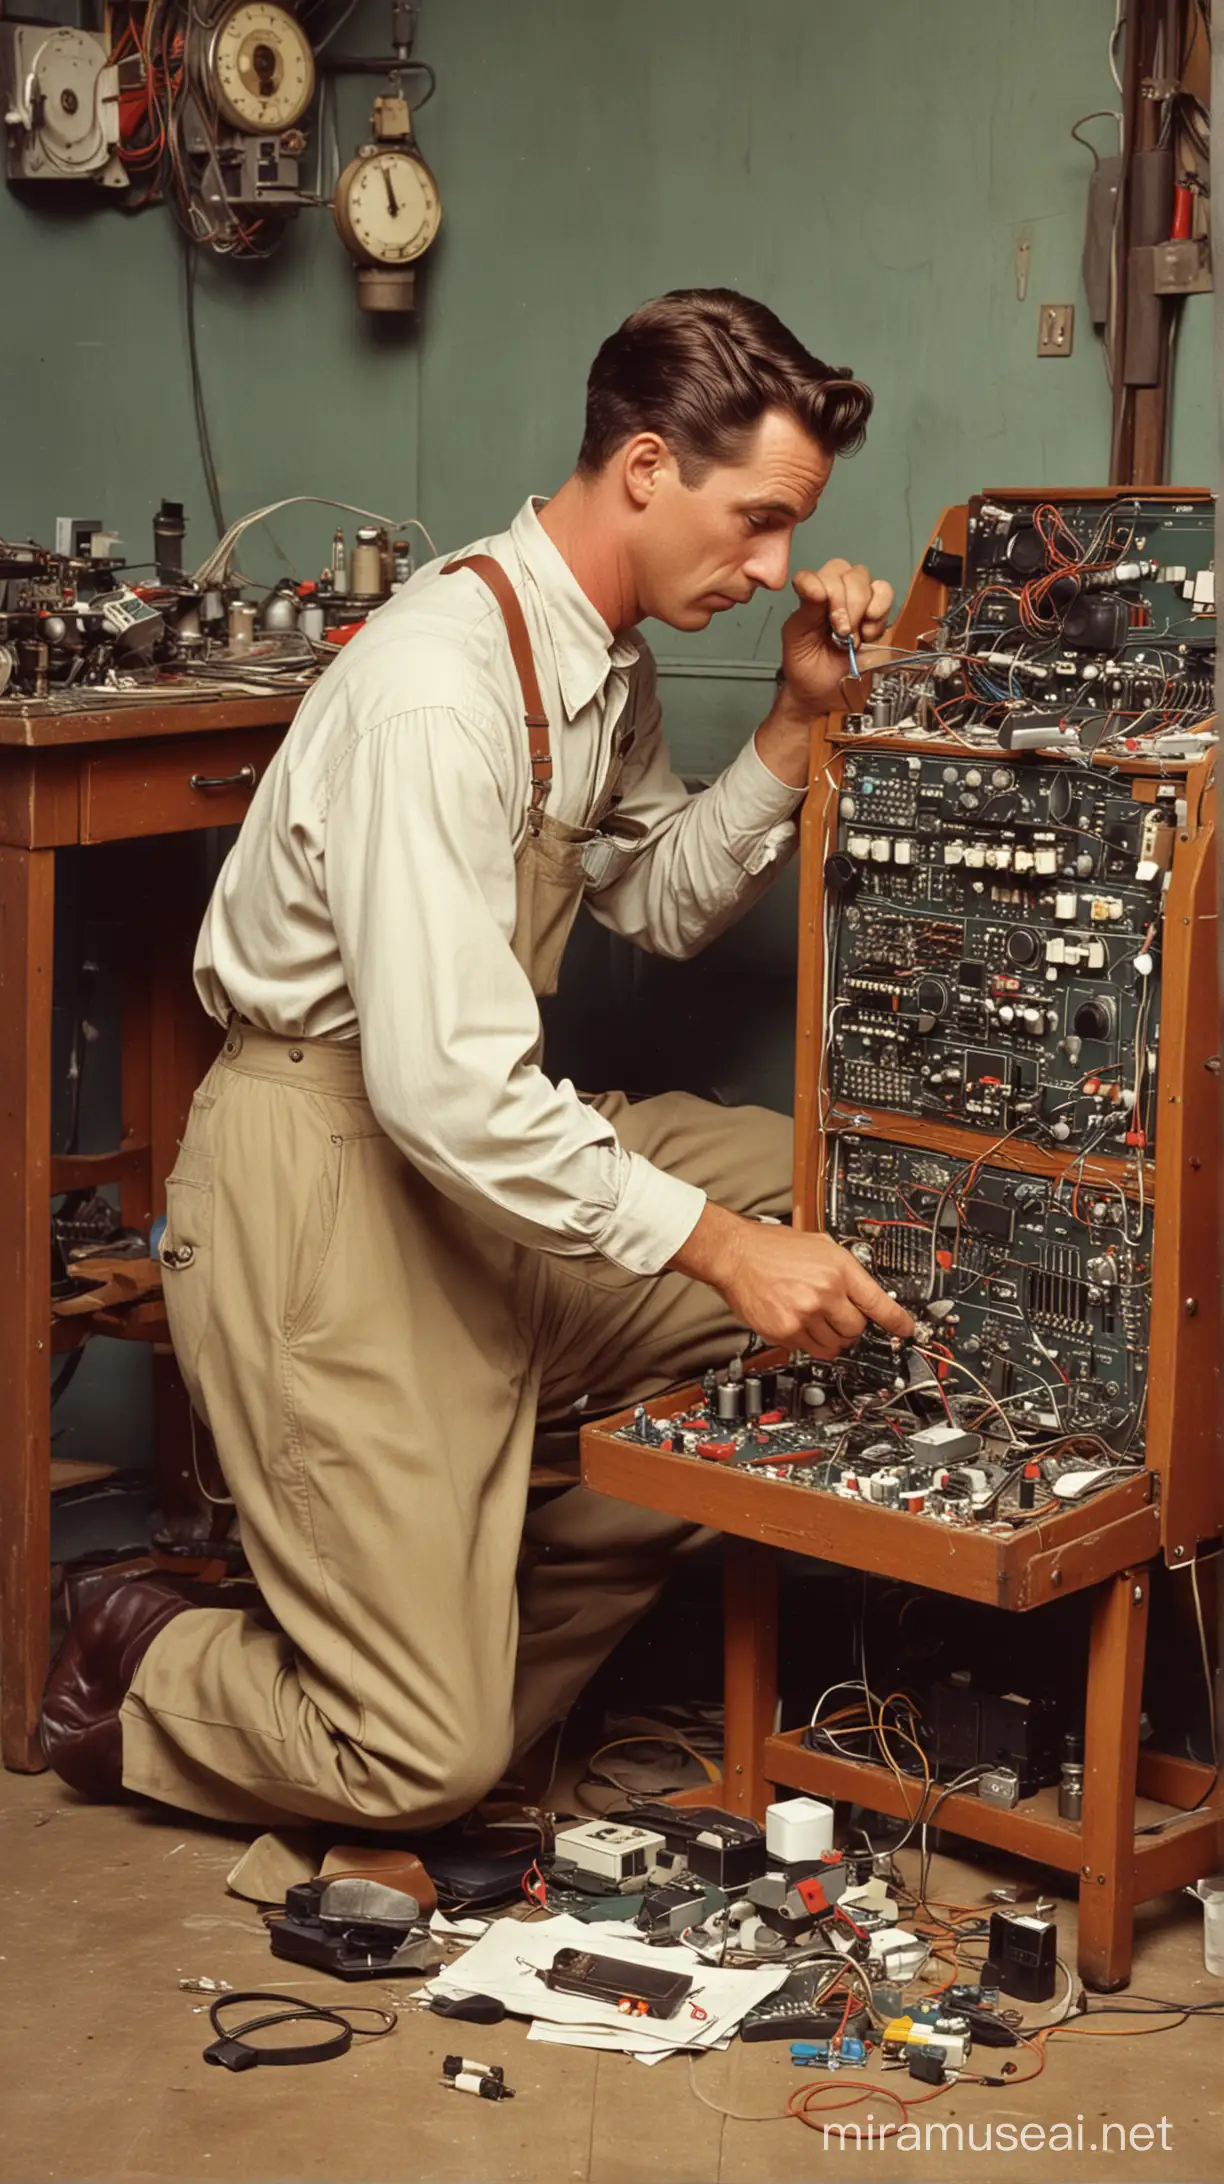 Vintage Electronics Repairman Working in Workshop 1960s Norman Rockwell Style